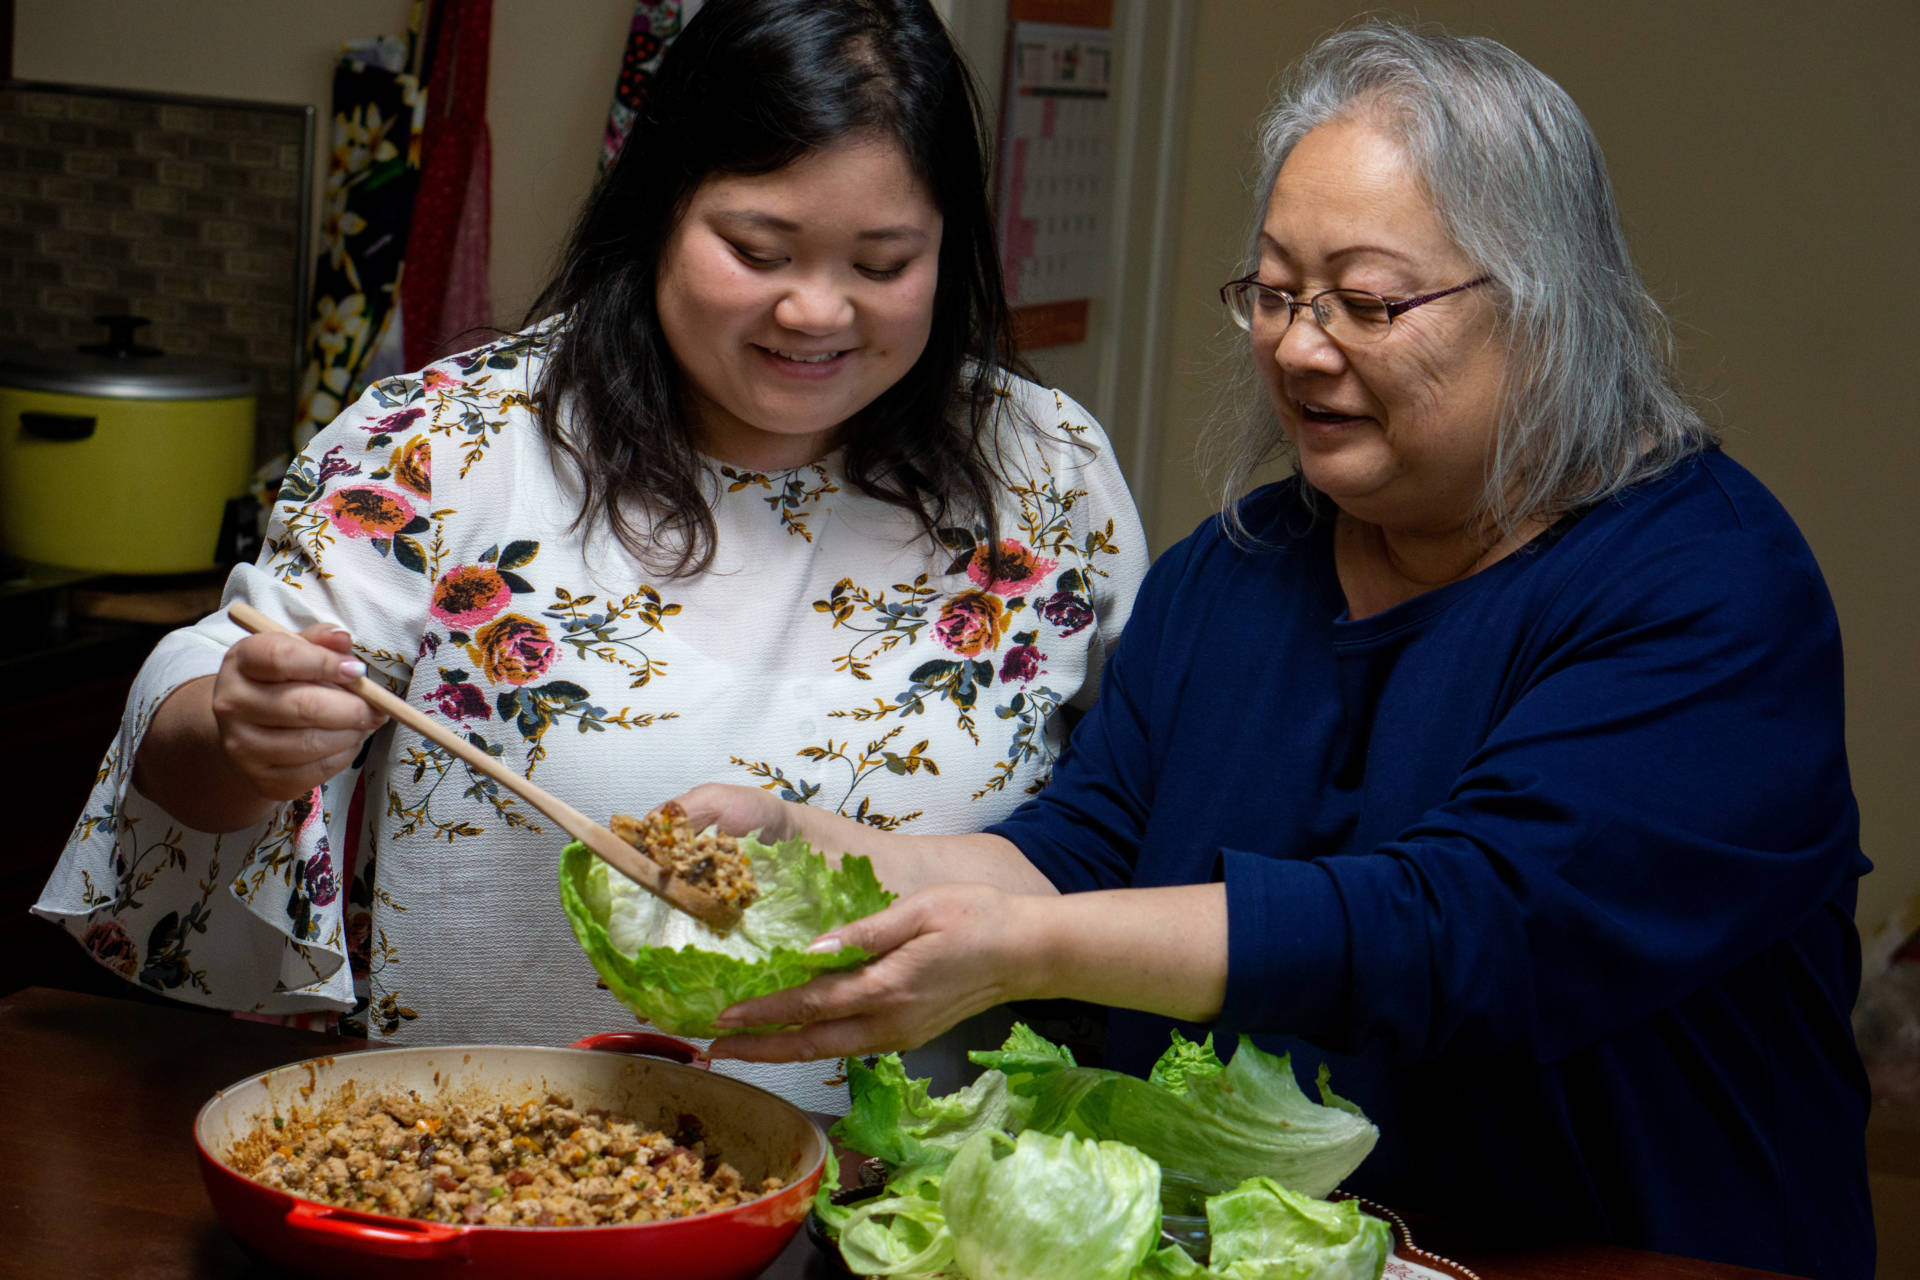 Cheryl and her mother, Diana, serve up some lettuce wraps.